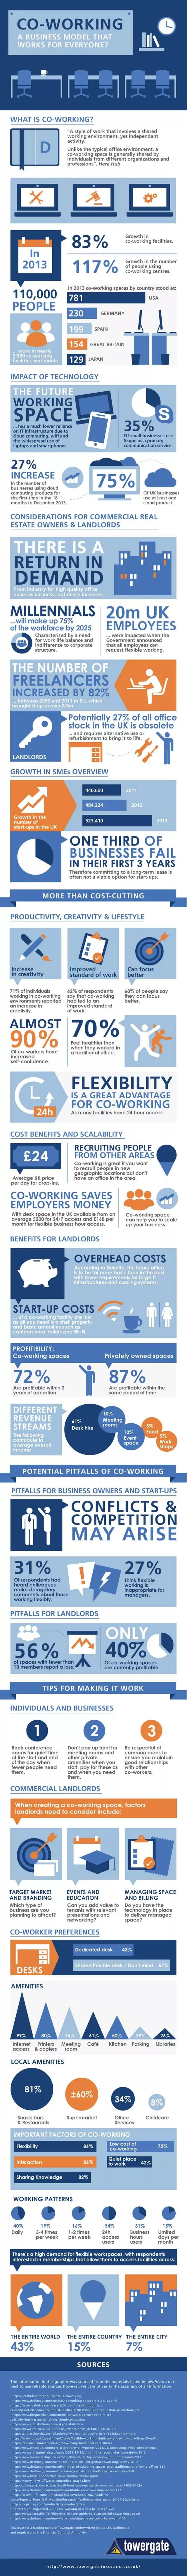 Co-Working - infographic1